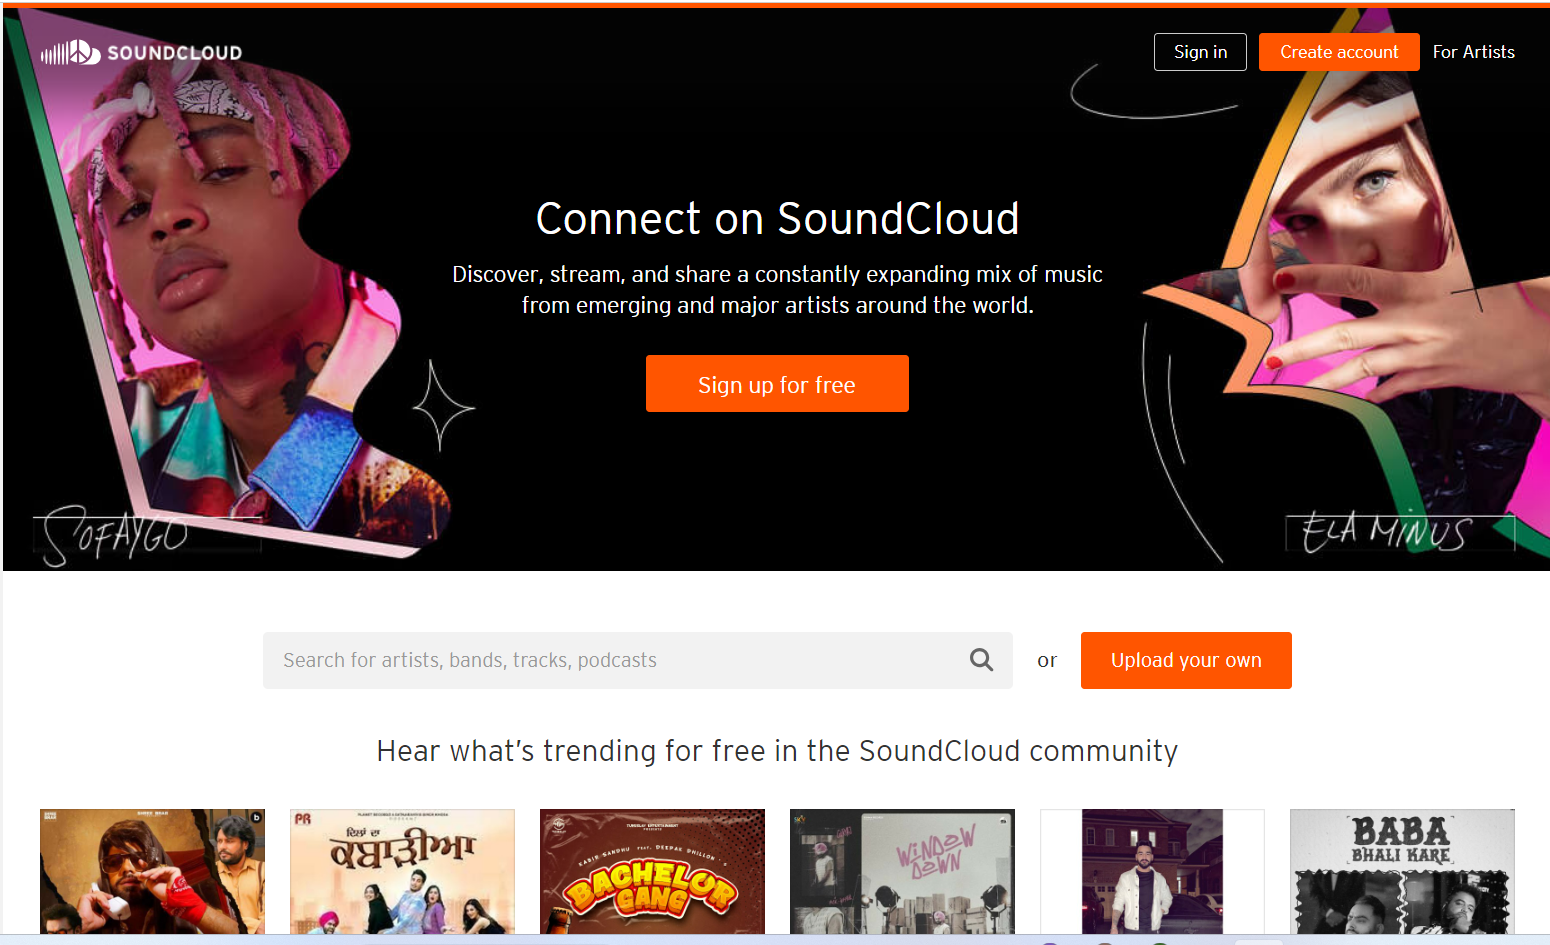 open audio streaming and distribution platform